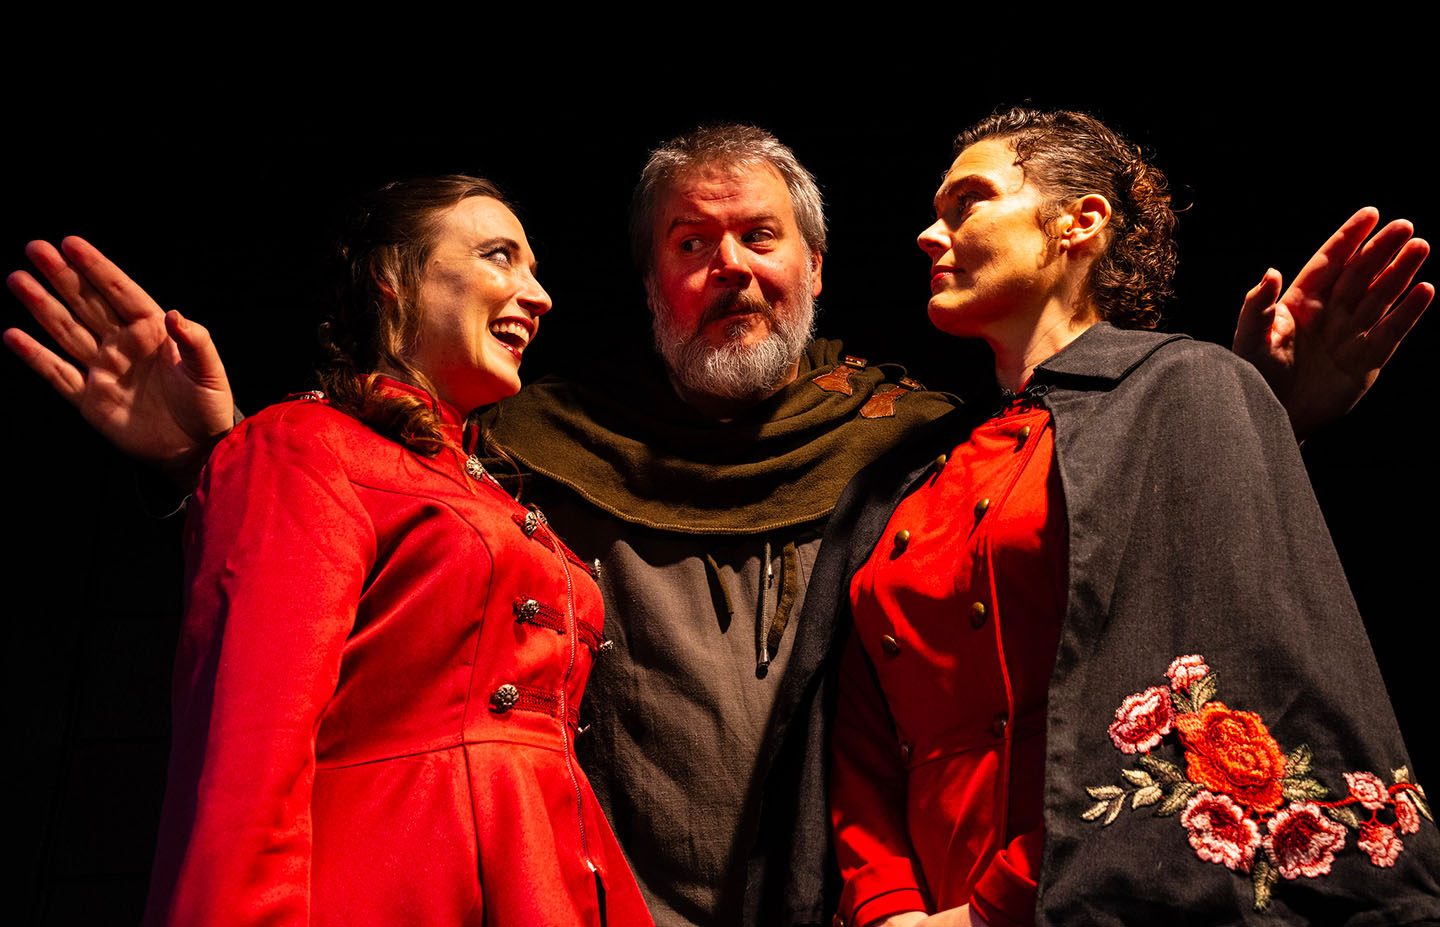 (L-R) Katherine Yacko, Jack Holloway and Nicole Jeannine Smith in Jobsite's Rosencrantz and Guildenstern are Dead. (Photo: Stage Photography of Tampa (SPOT))